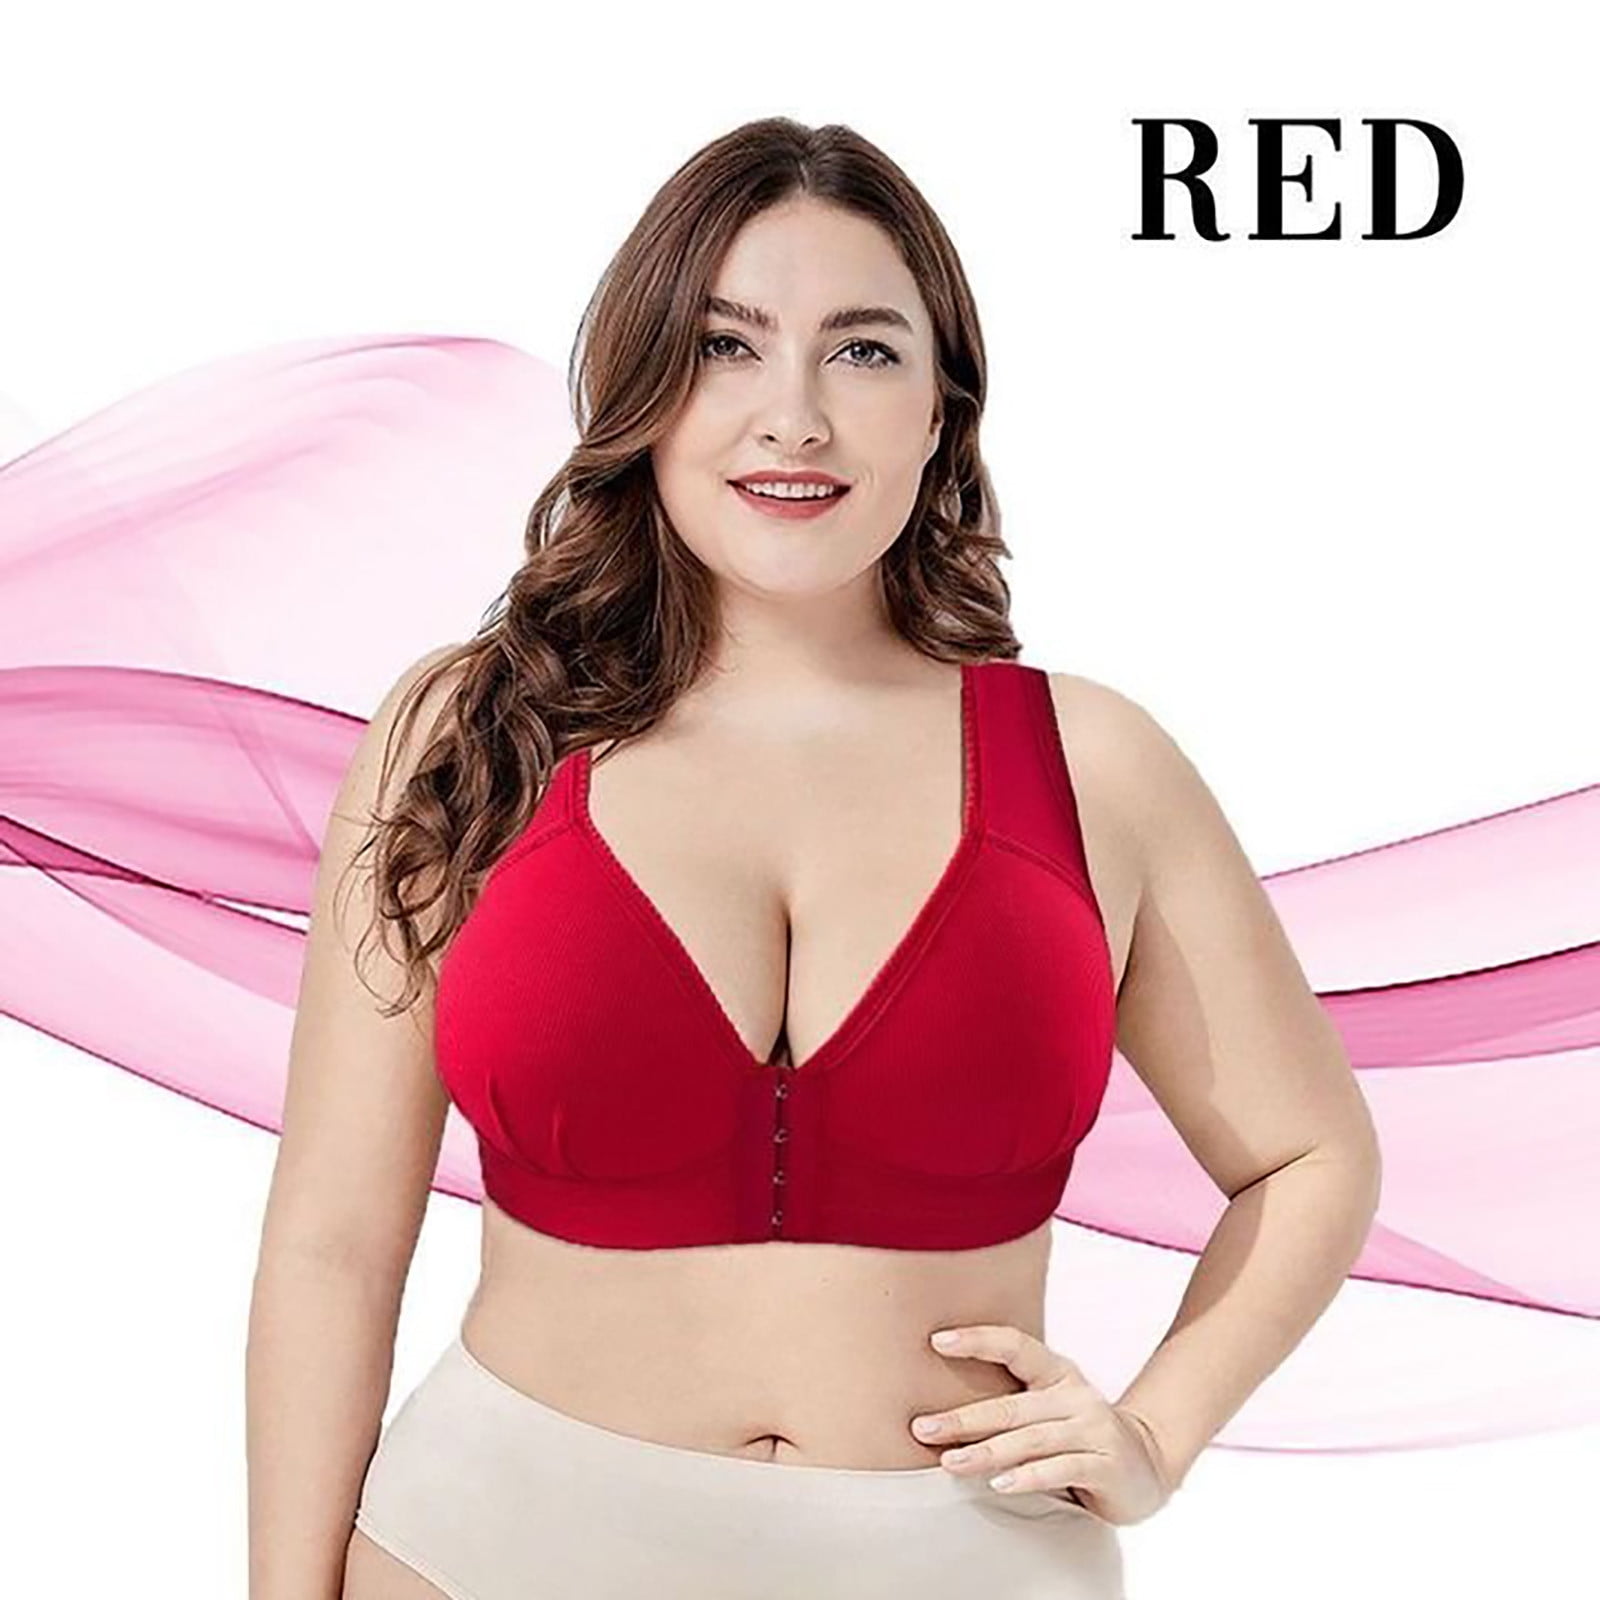 GATXVG Plus Size Bra for Big Busted Women No Underwire Full Cup